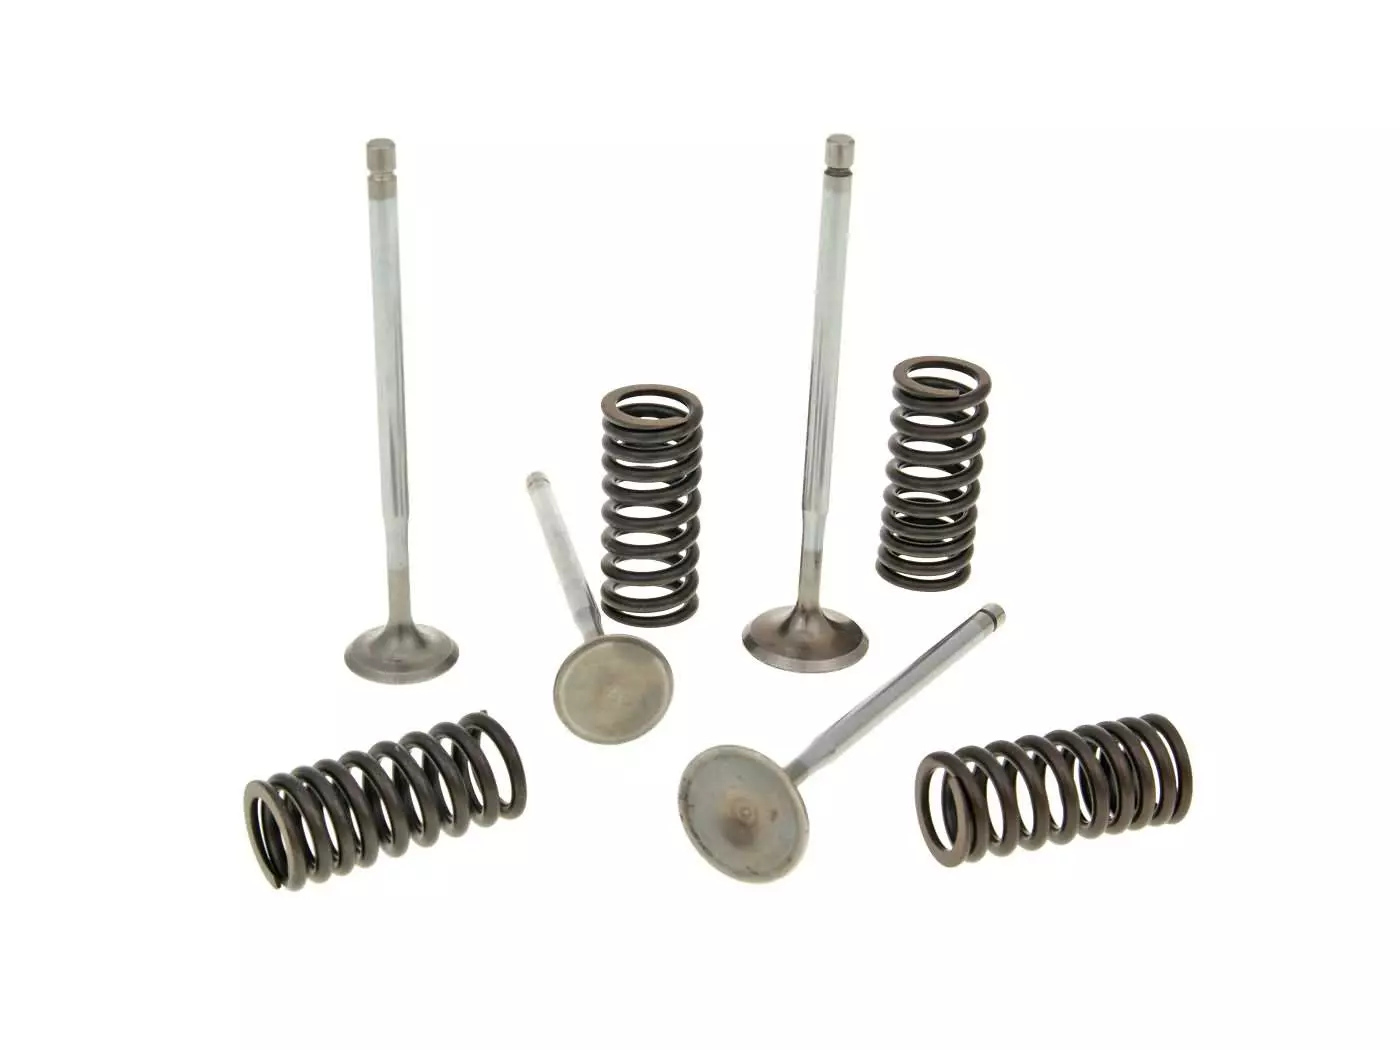 Cylinder Head Valves Malossi Racing With Springs For Piaggio 4V LC Engines